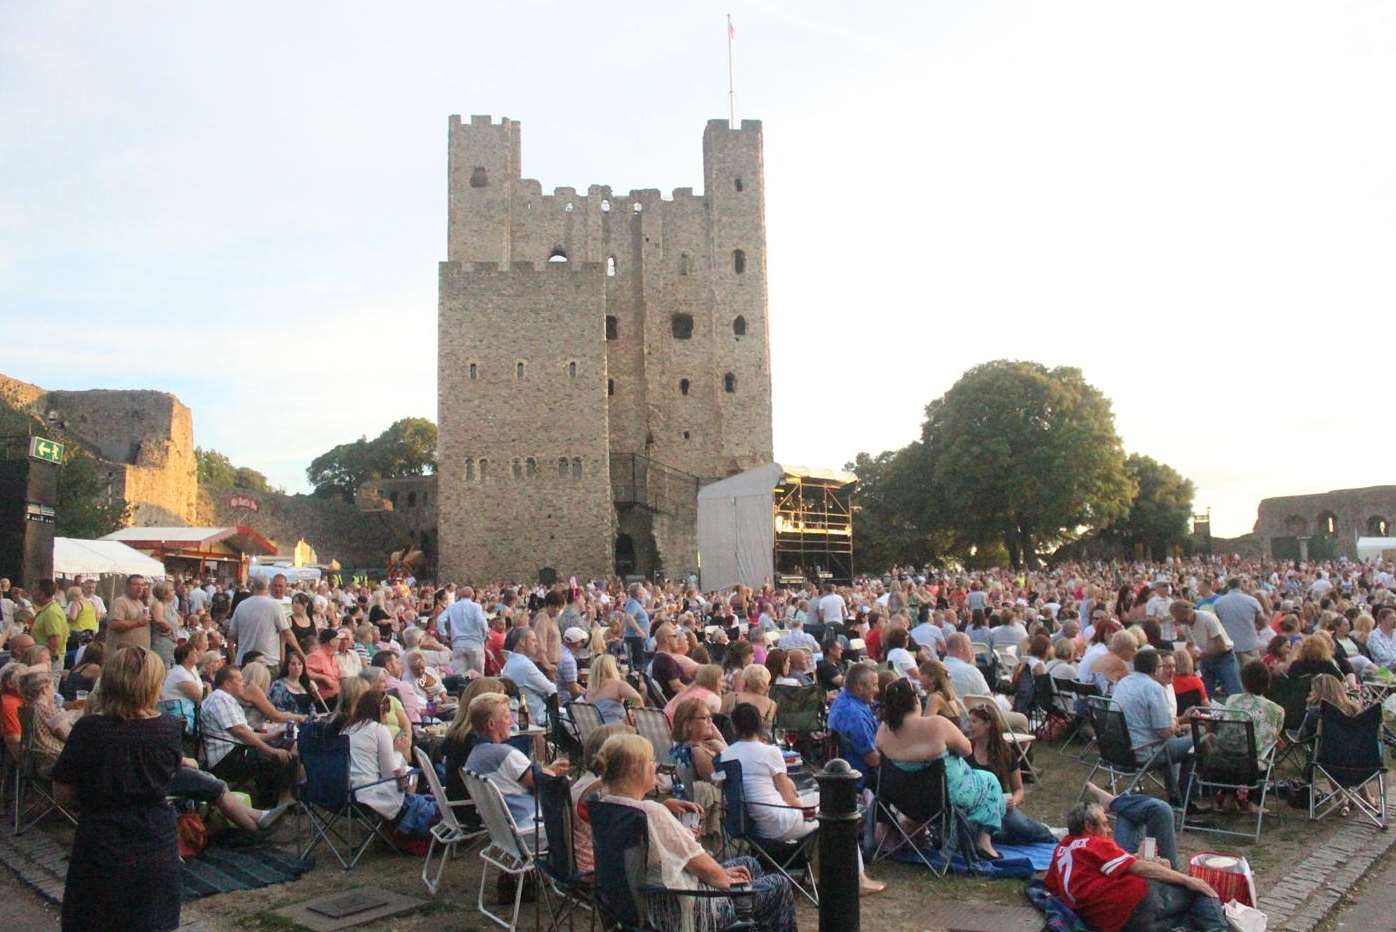 The Castle Gardens were packed with fans waiting for Level 42. Photo Adam Elsden.